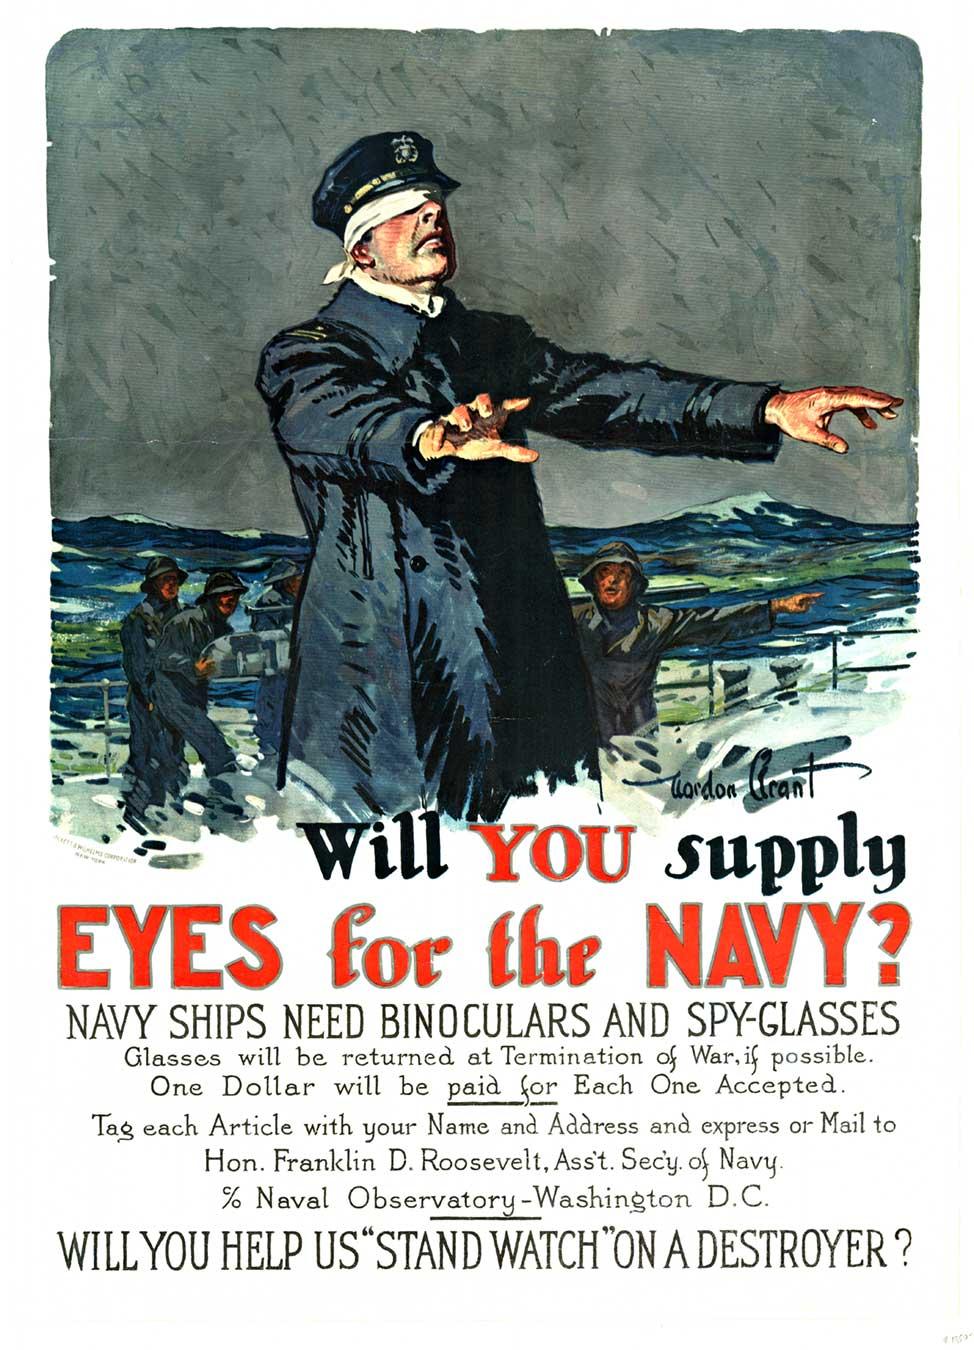 Gordon Grant Portrait Print - Original 'Will You Supply Eyes for the Navy?' vintage American military poster